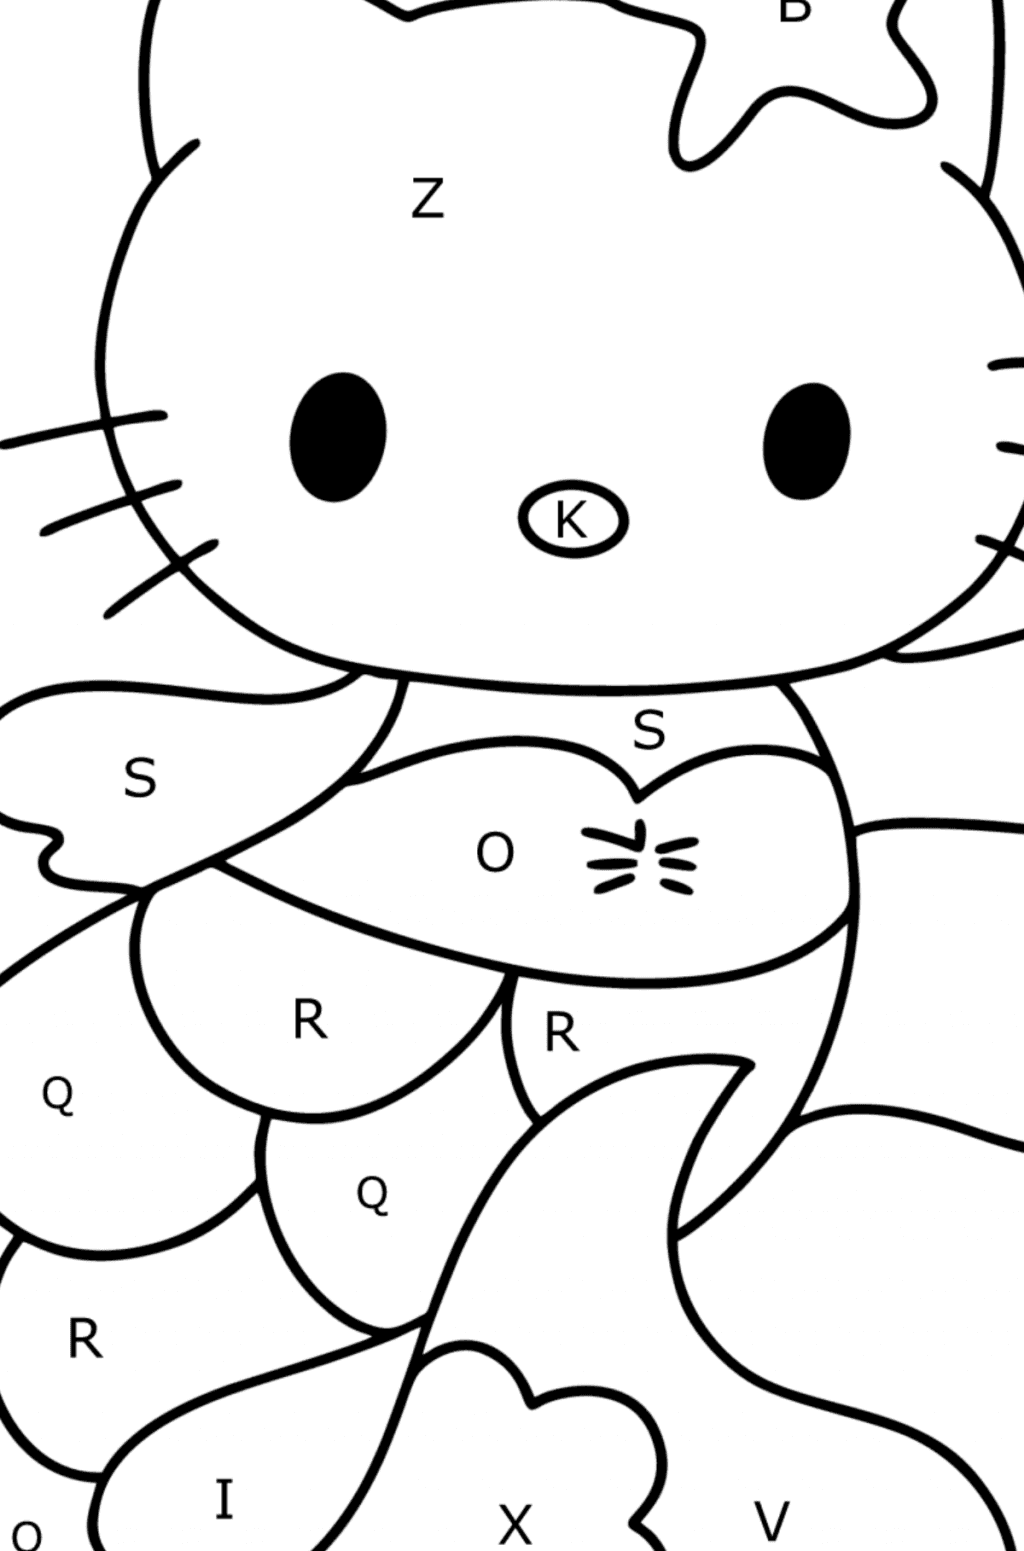 Hello Kitty Mermaid coloring page ♥ Online and Print for Free!